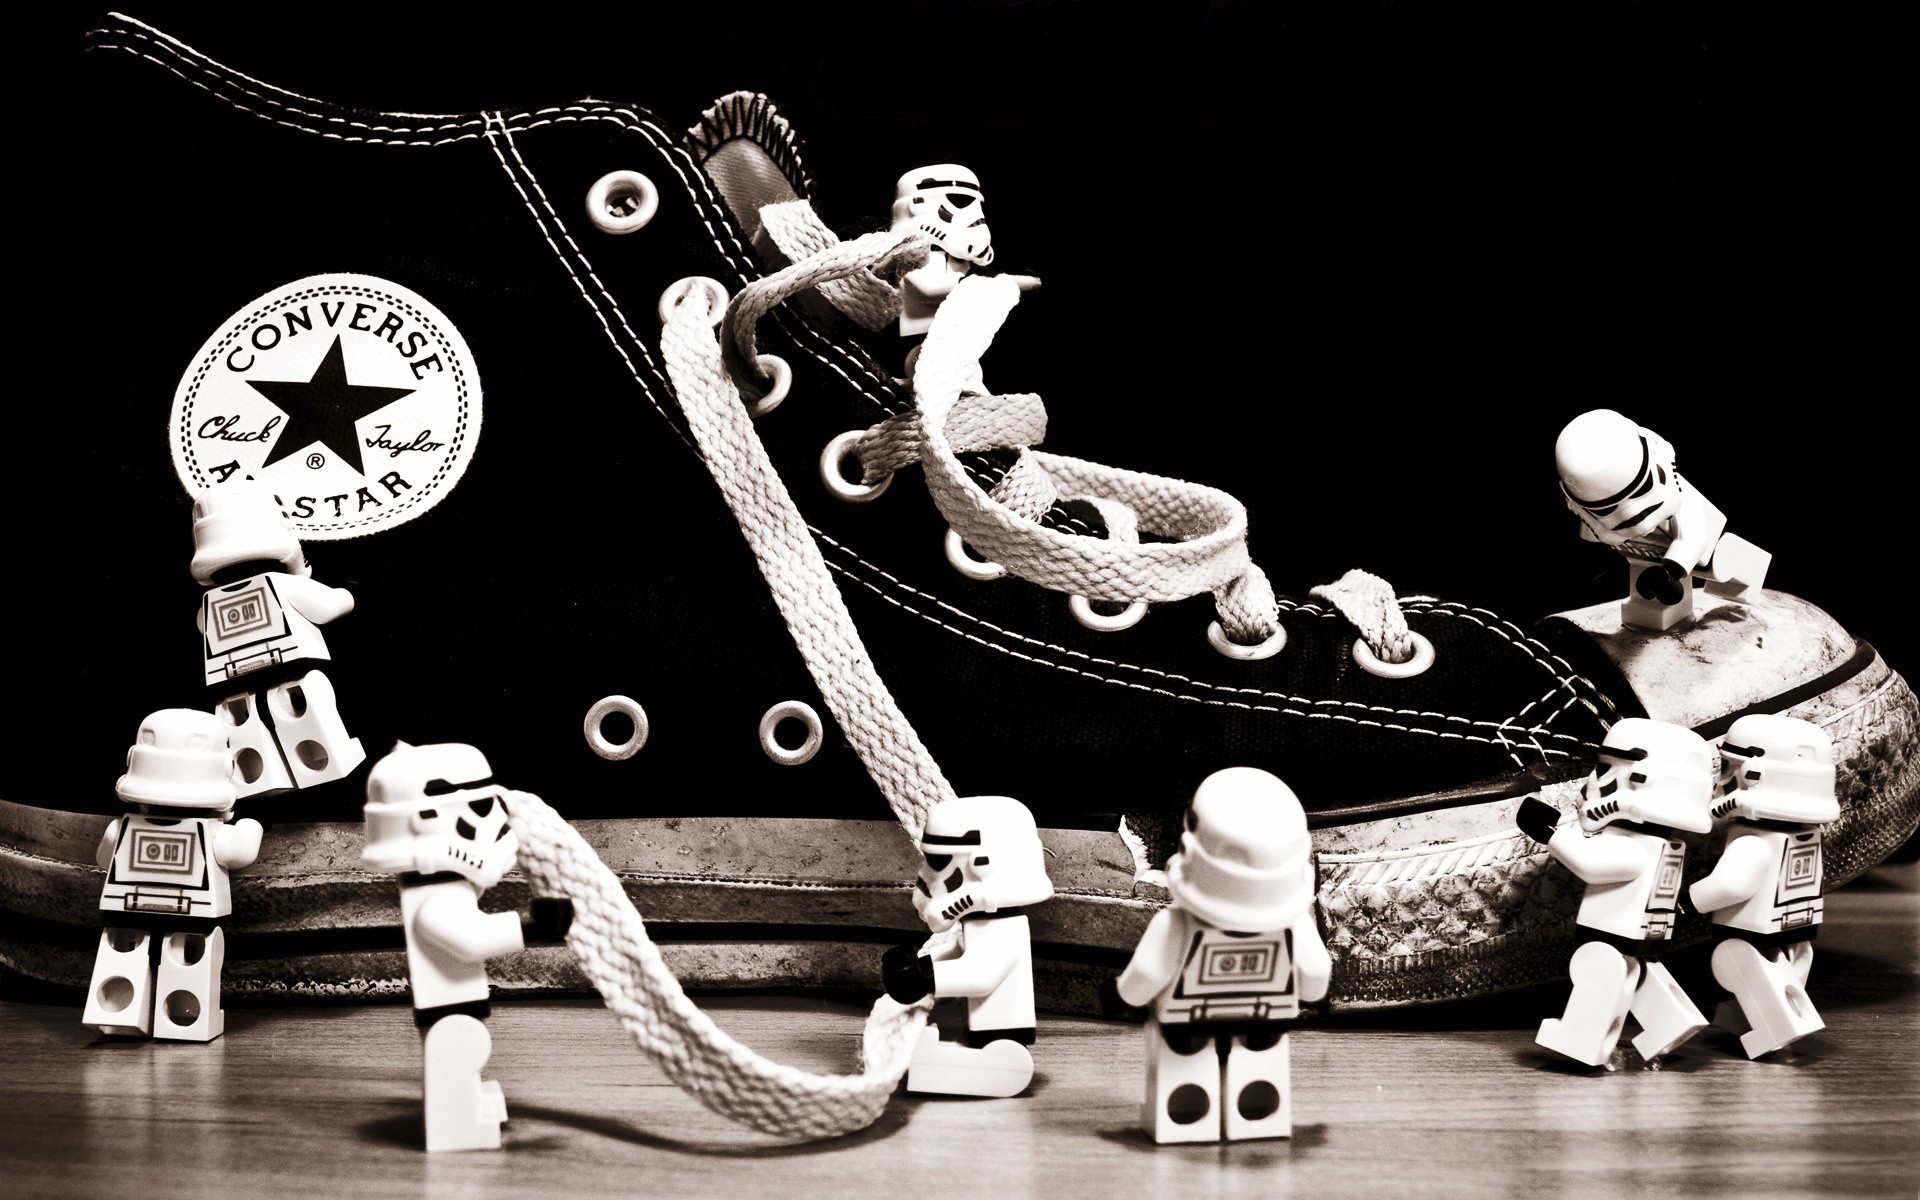 products, converse, lego, monochrome, shoe, star wars, stormtrooper Free Stock Photo